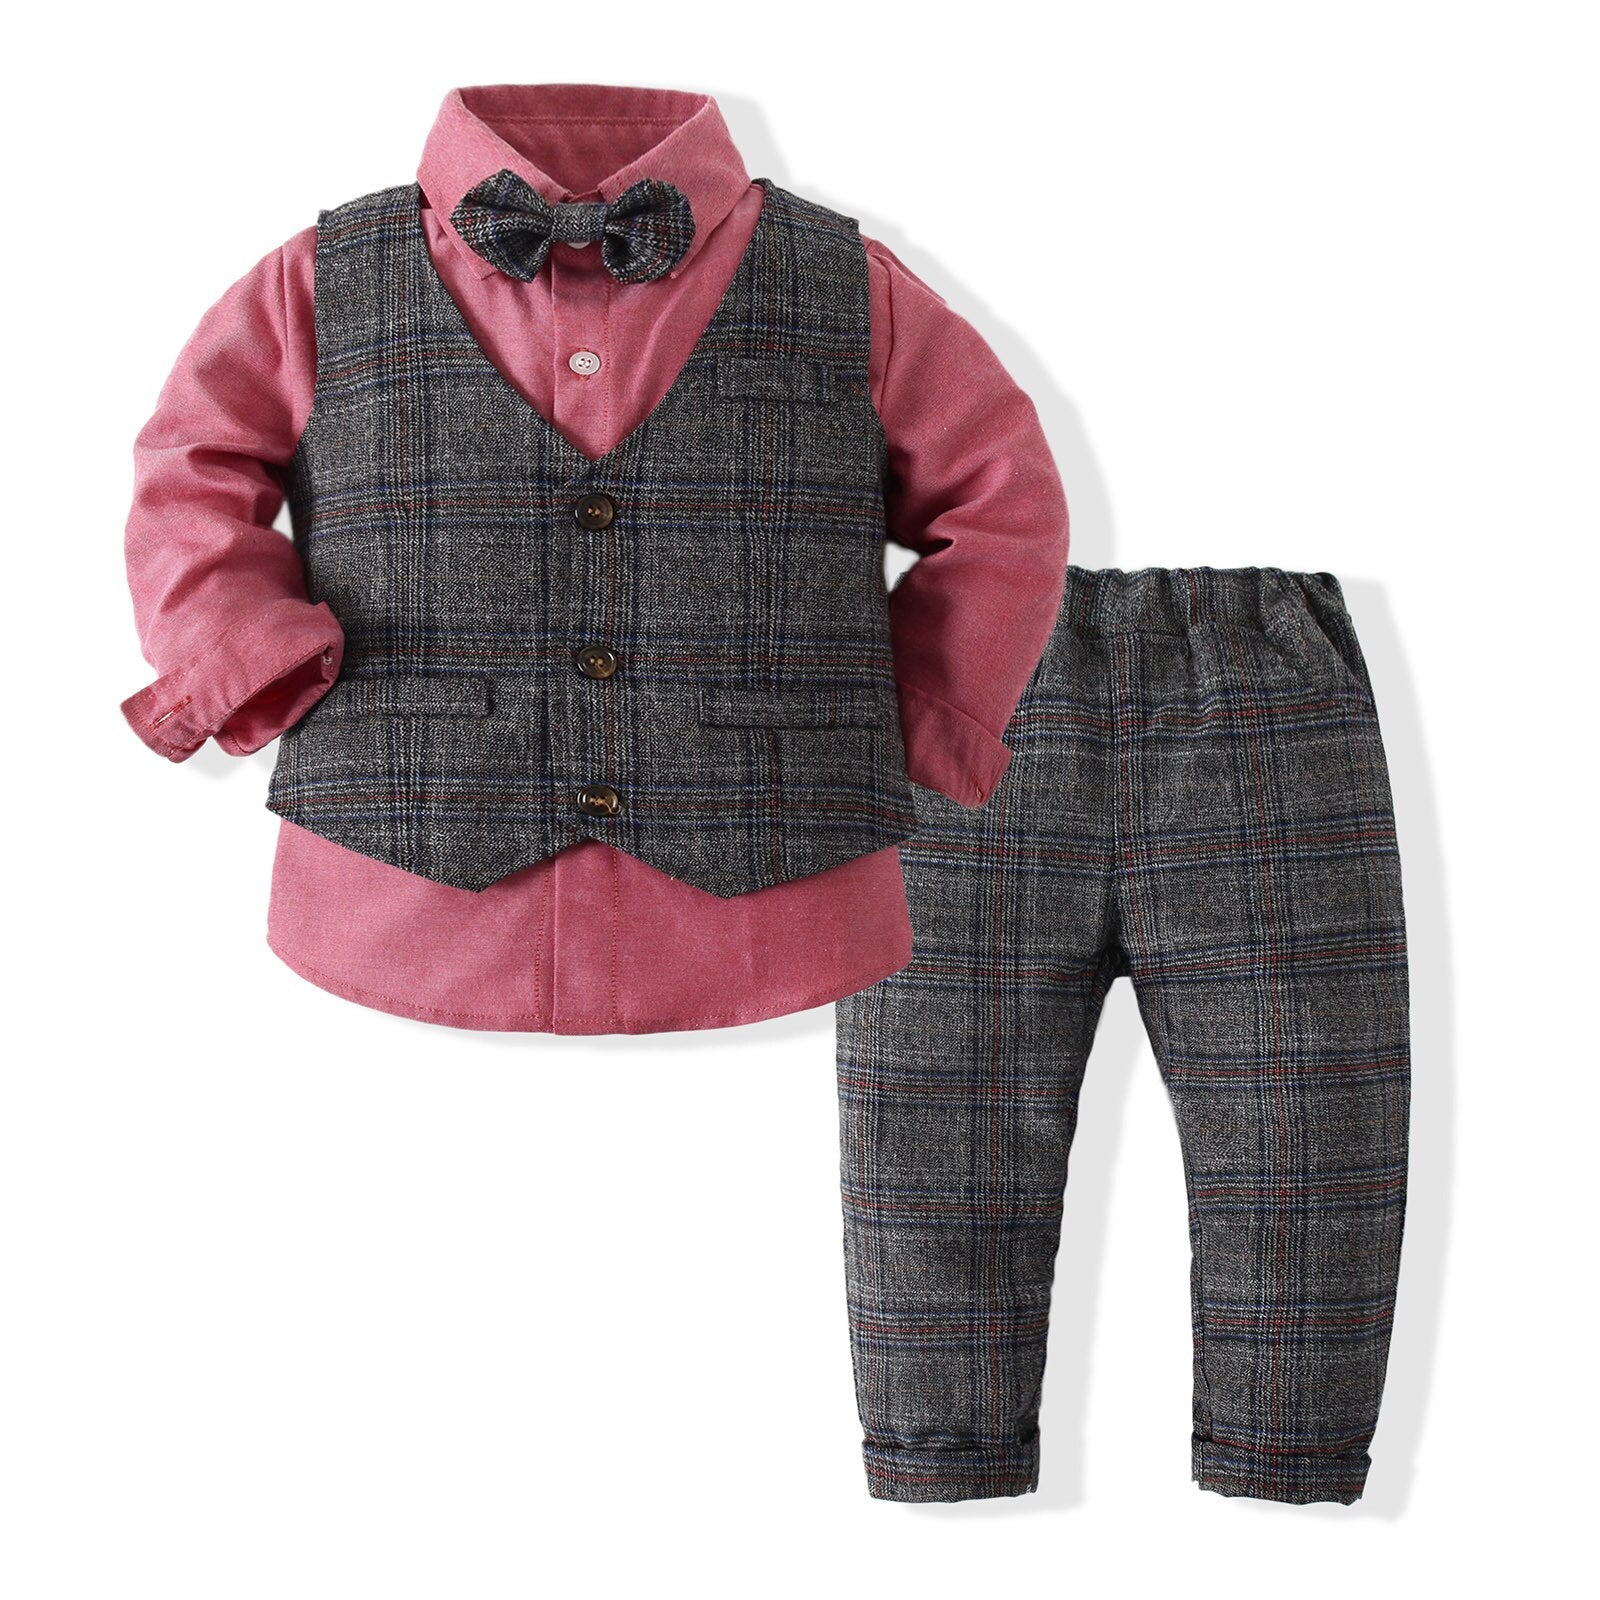 Kids Baby Boy Wedding Party Outfits Sets 2 Pcs